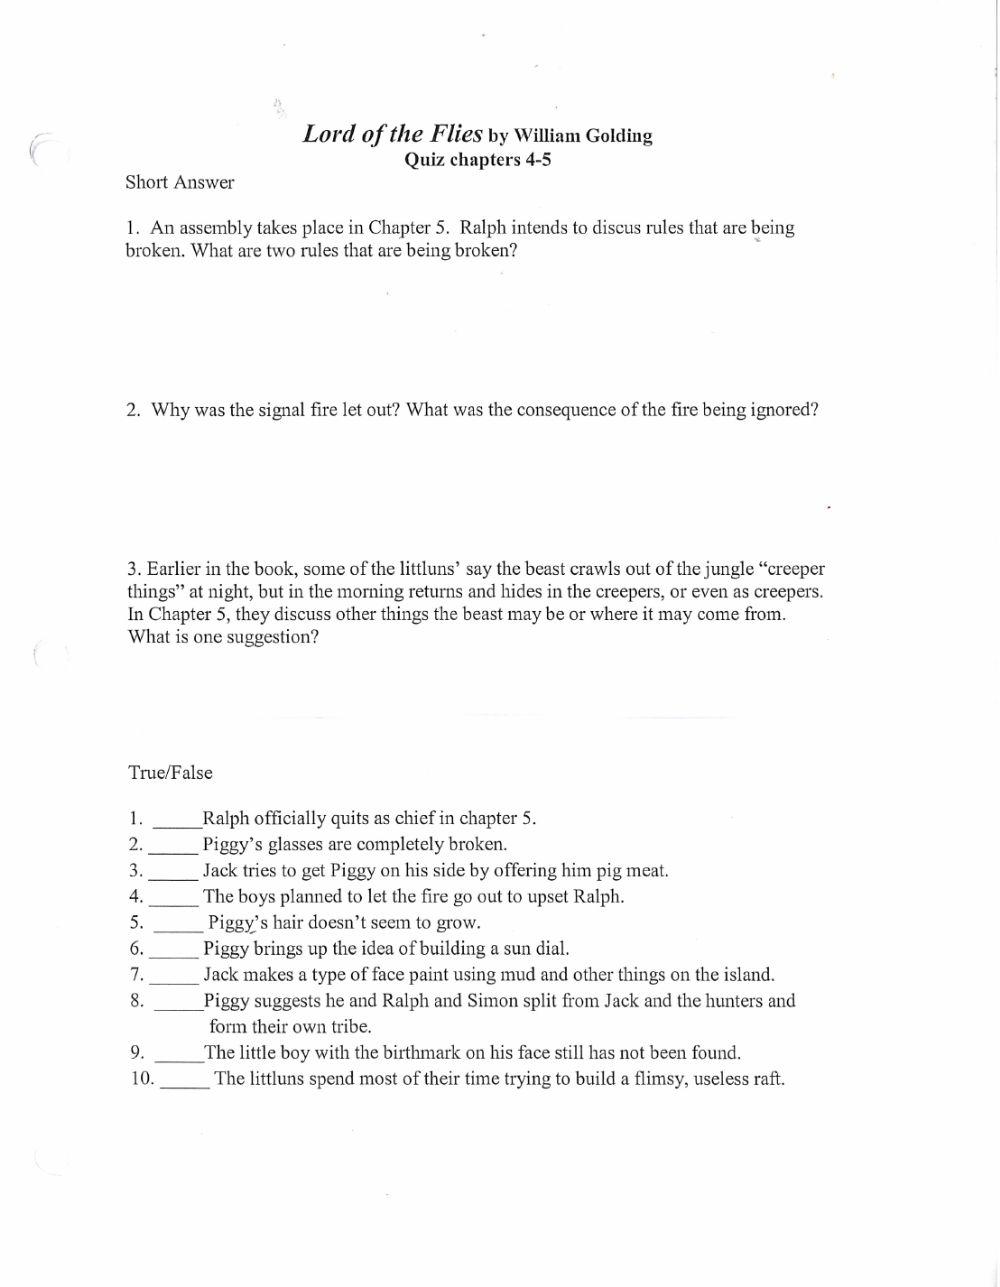 Lord of the Flies ch. 4-5 Quiz